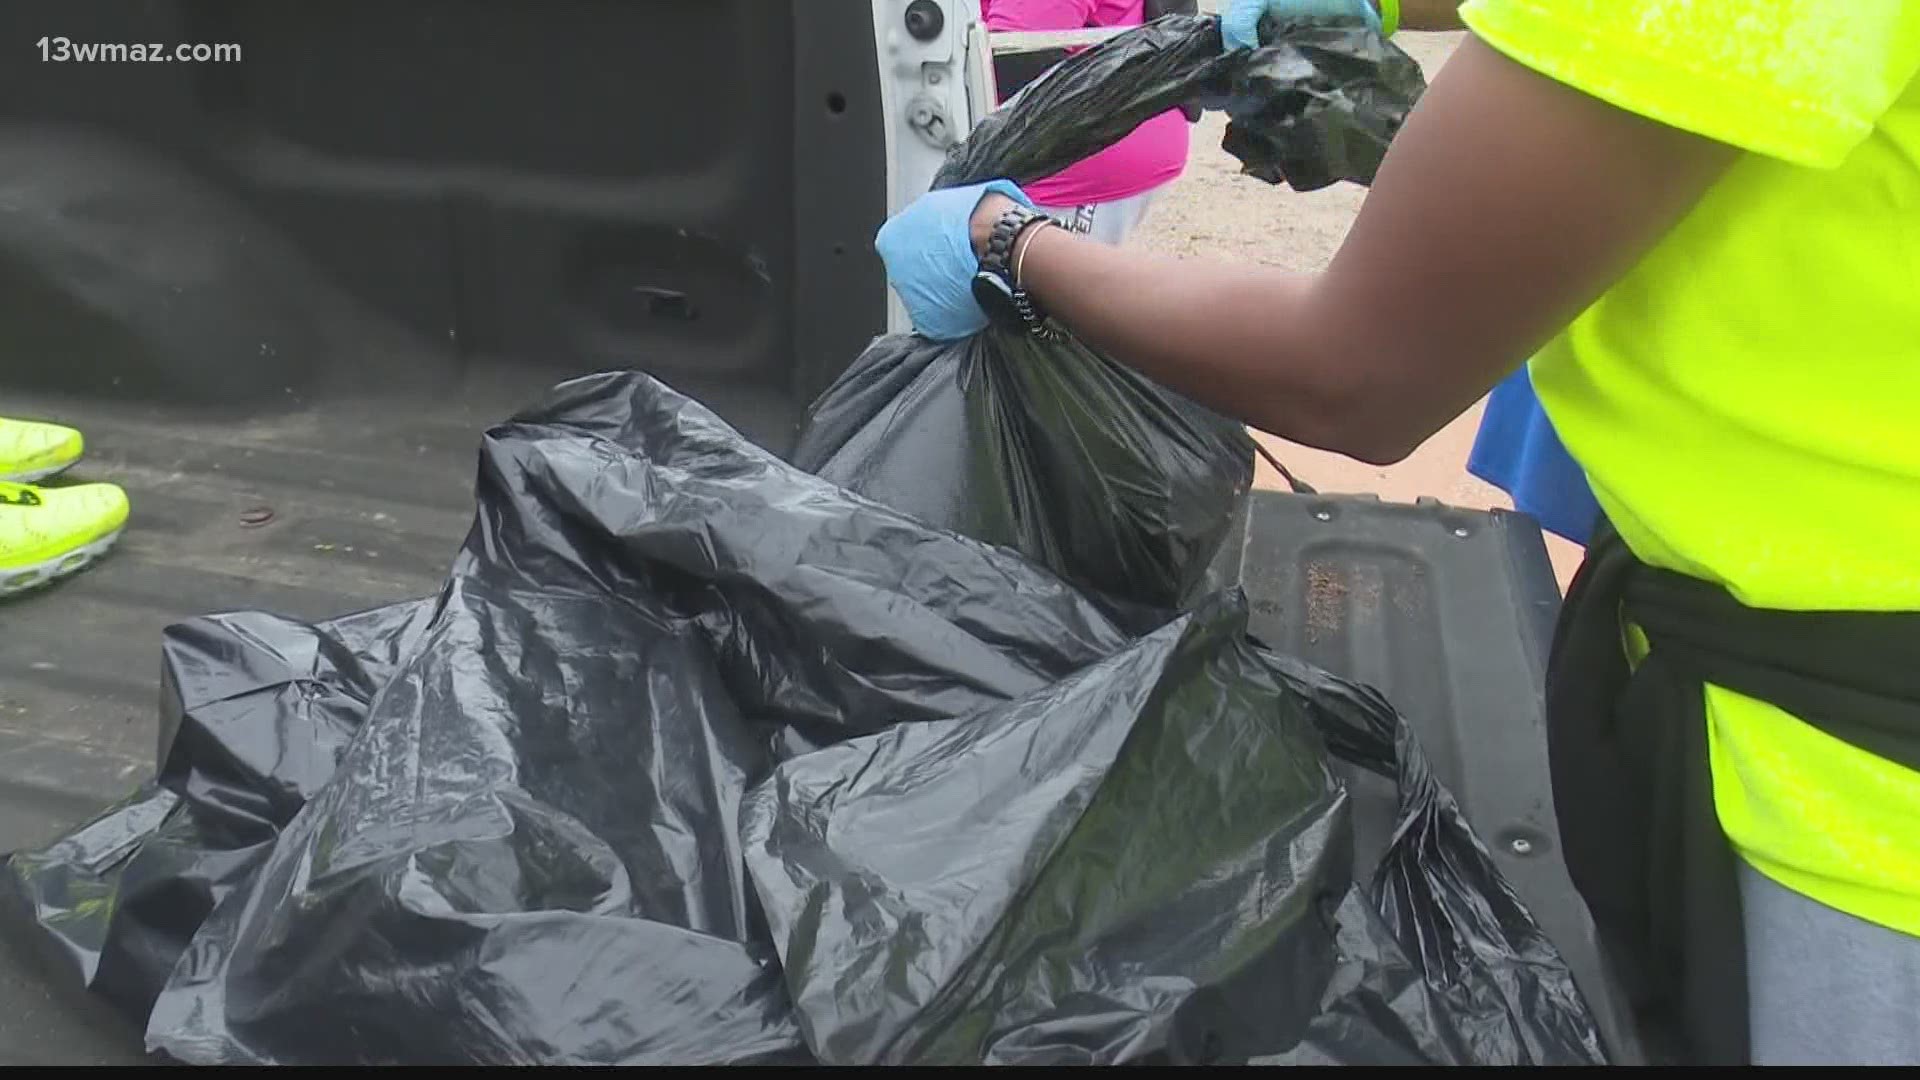 People all across Macon gathered Saturday to help clean trash and remove debris from streets and neighborhoods.